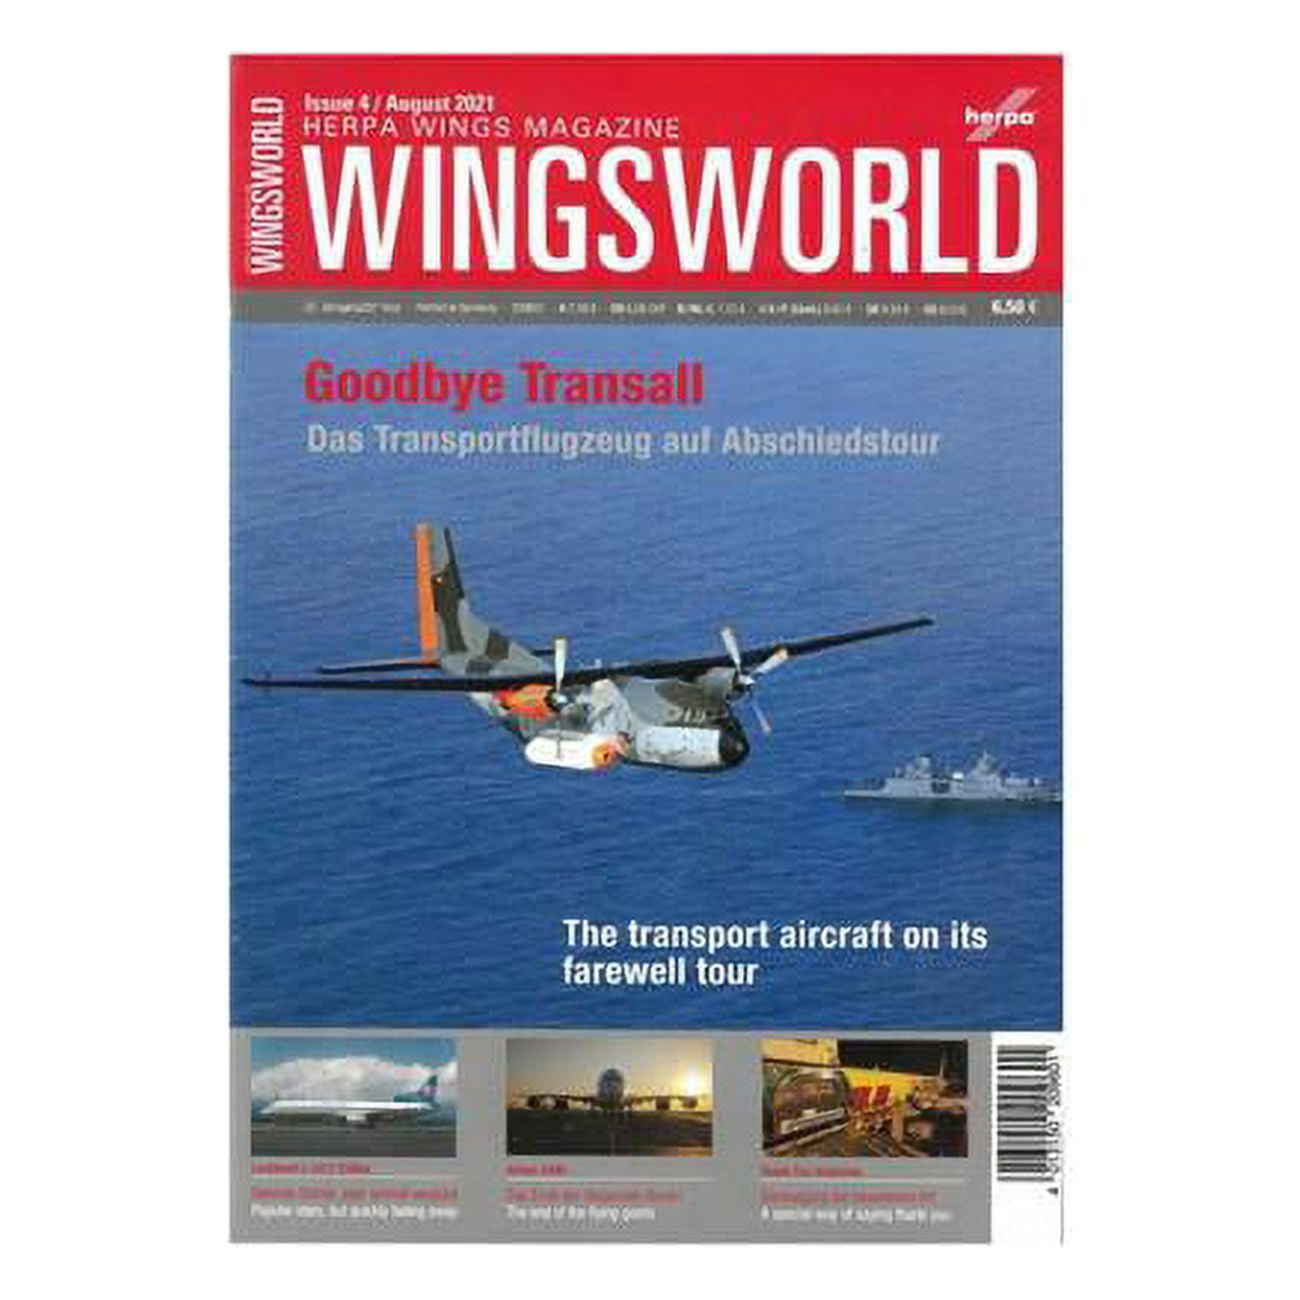 Picture of Herpa HE209601 Wingsworld Issue 4 - August 2021 Airlines Magazine